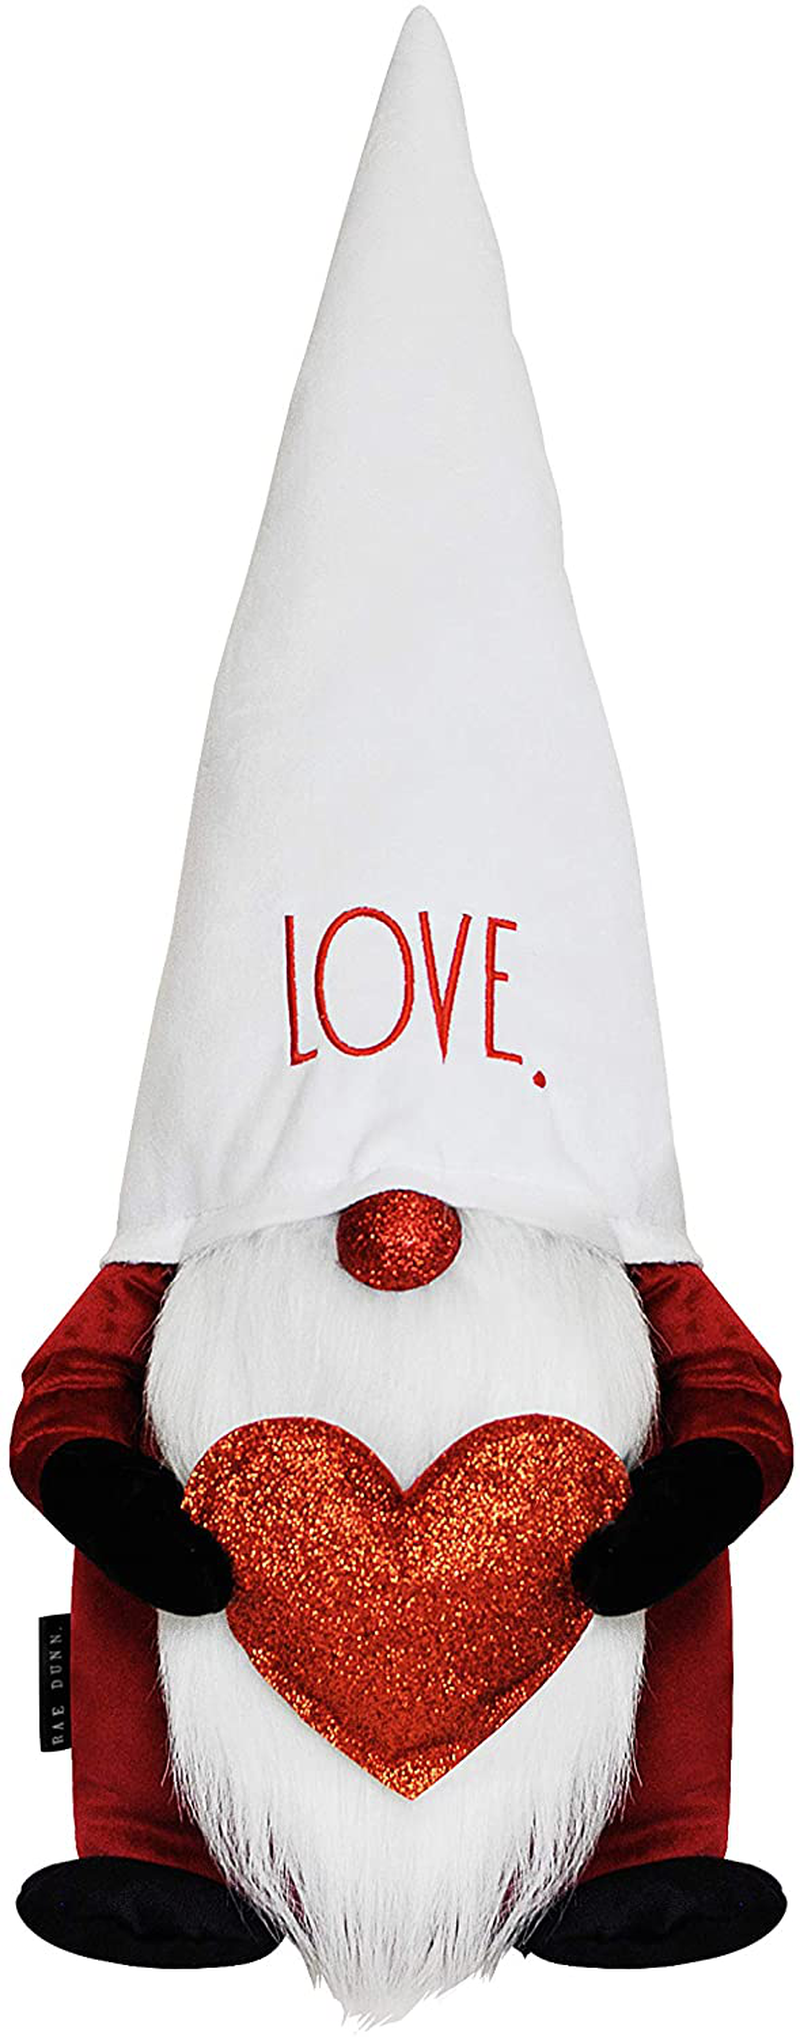 Rae Dunn Christmas Gnome Merry - 19 Inch Stuffed Plush Santa Figurine Doll with Felt Hat - Cute Ornaments and Holiday Decorations for Home Decor and Office Home & Garden > Decor > Seasonal & Holiday Decorations& Garden > Decor > Seasonal & Holiday Decorations Rae Dunn White With Heart - Merry Christmas  